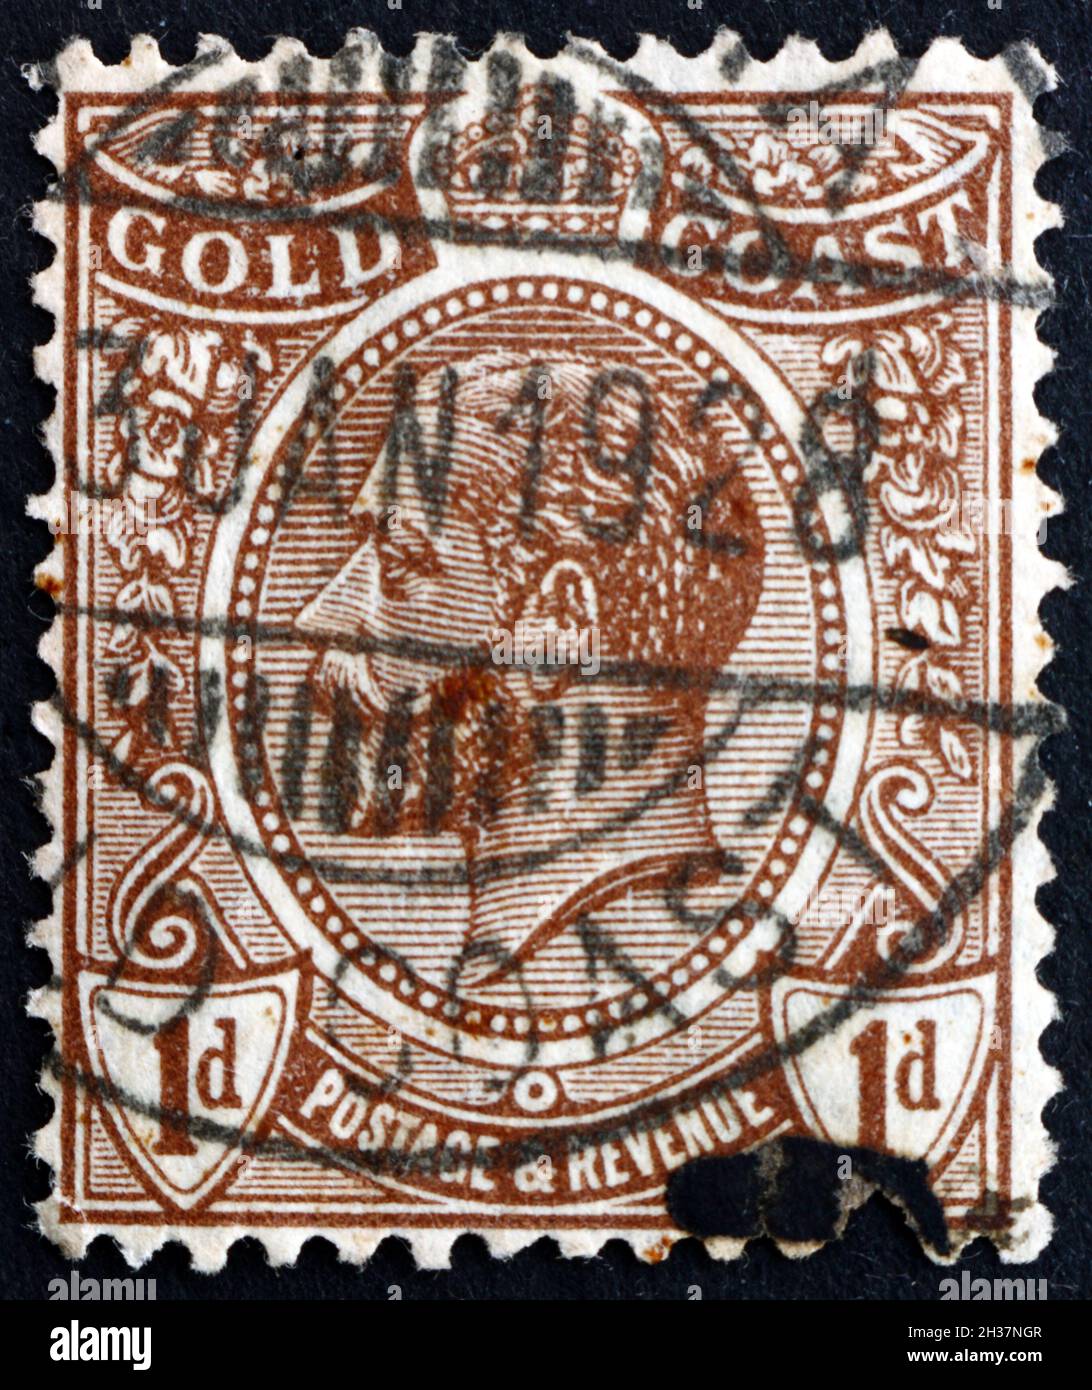 GOLD COAST - CIRCA 1922: a stamp printed in British colony Gold Coast (now Ghana) shows King George V, circa 1922 Stock Photo